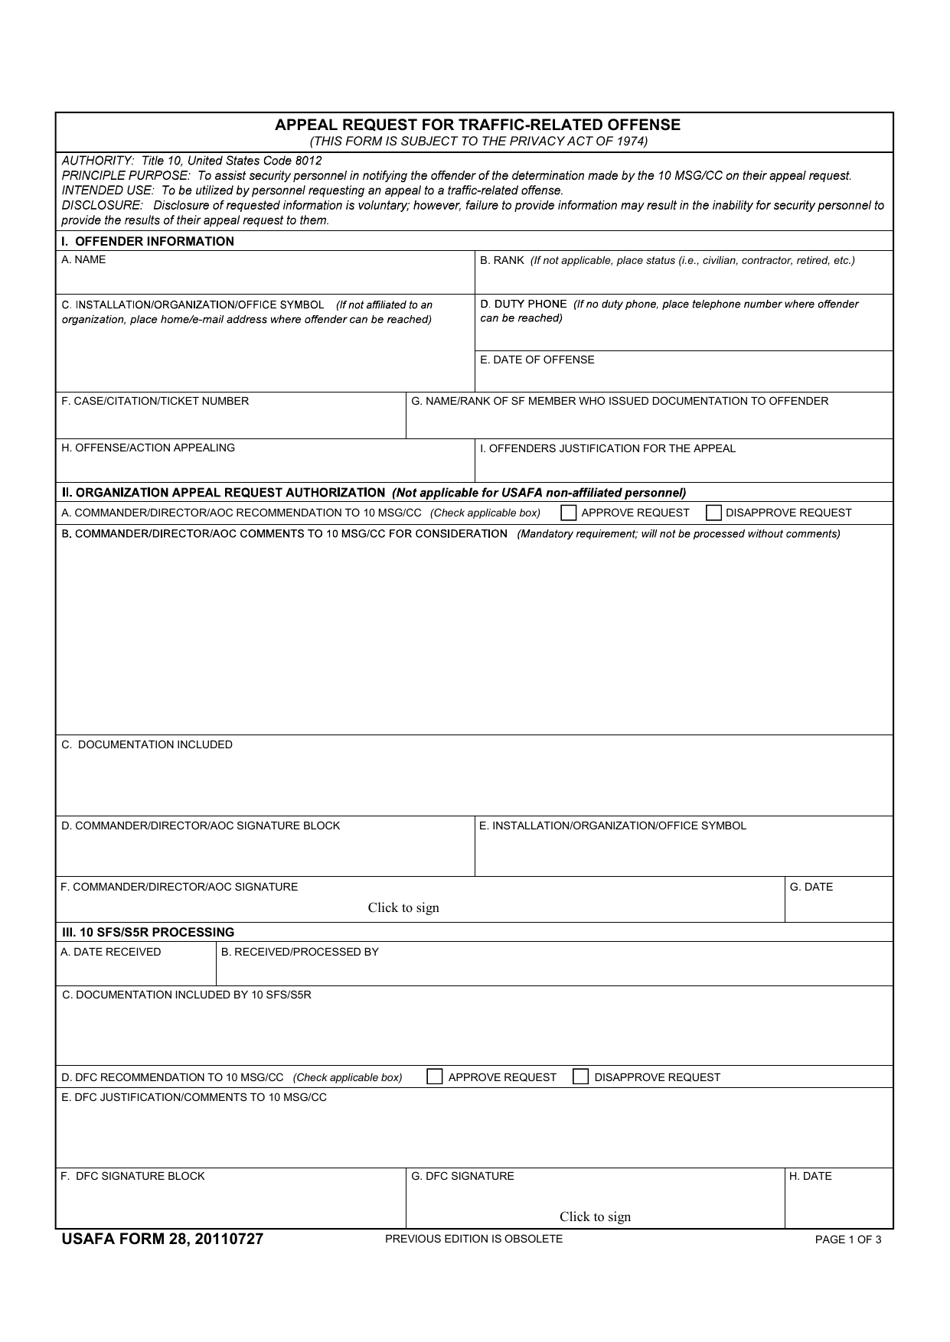 USAFA Form 28 Appeal Request for Traffic-Related Offense, Page 1